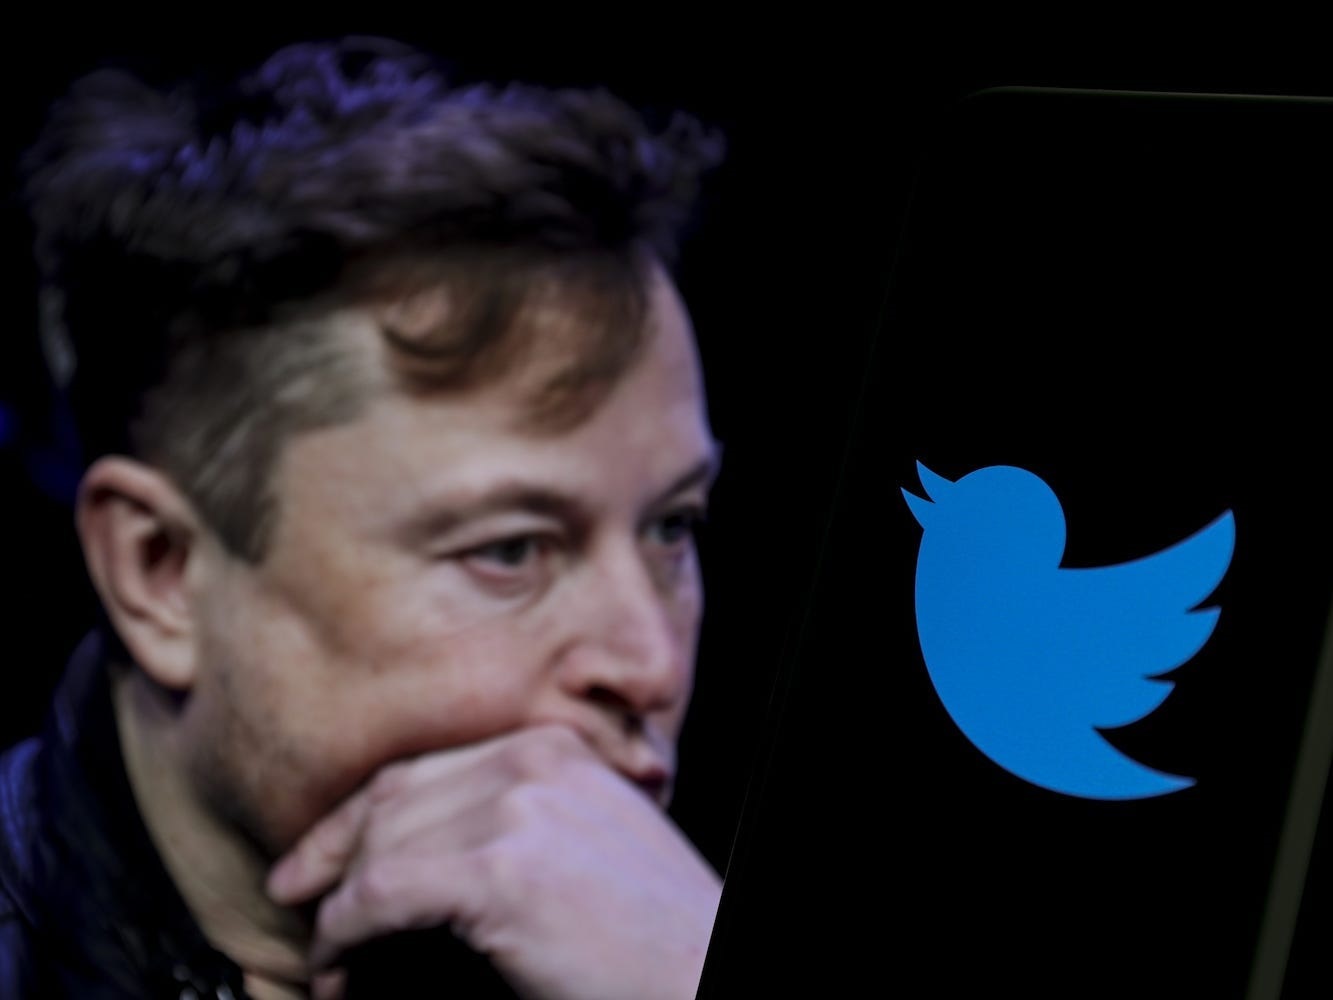 Since buying Twitter last year for $44 billion, Elon Musk has fired thousands of employees. 